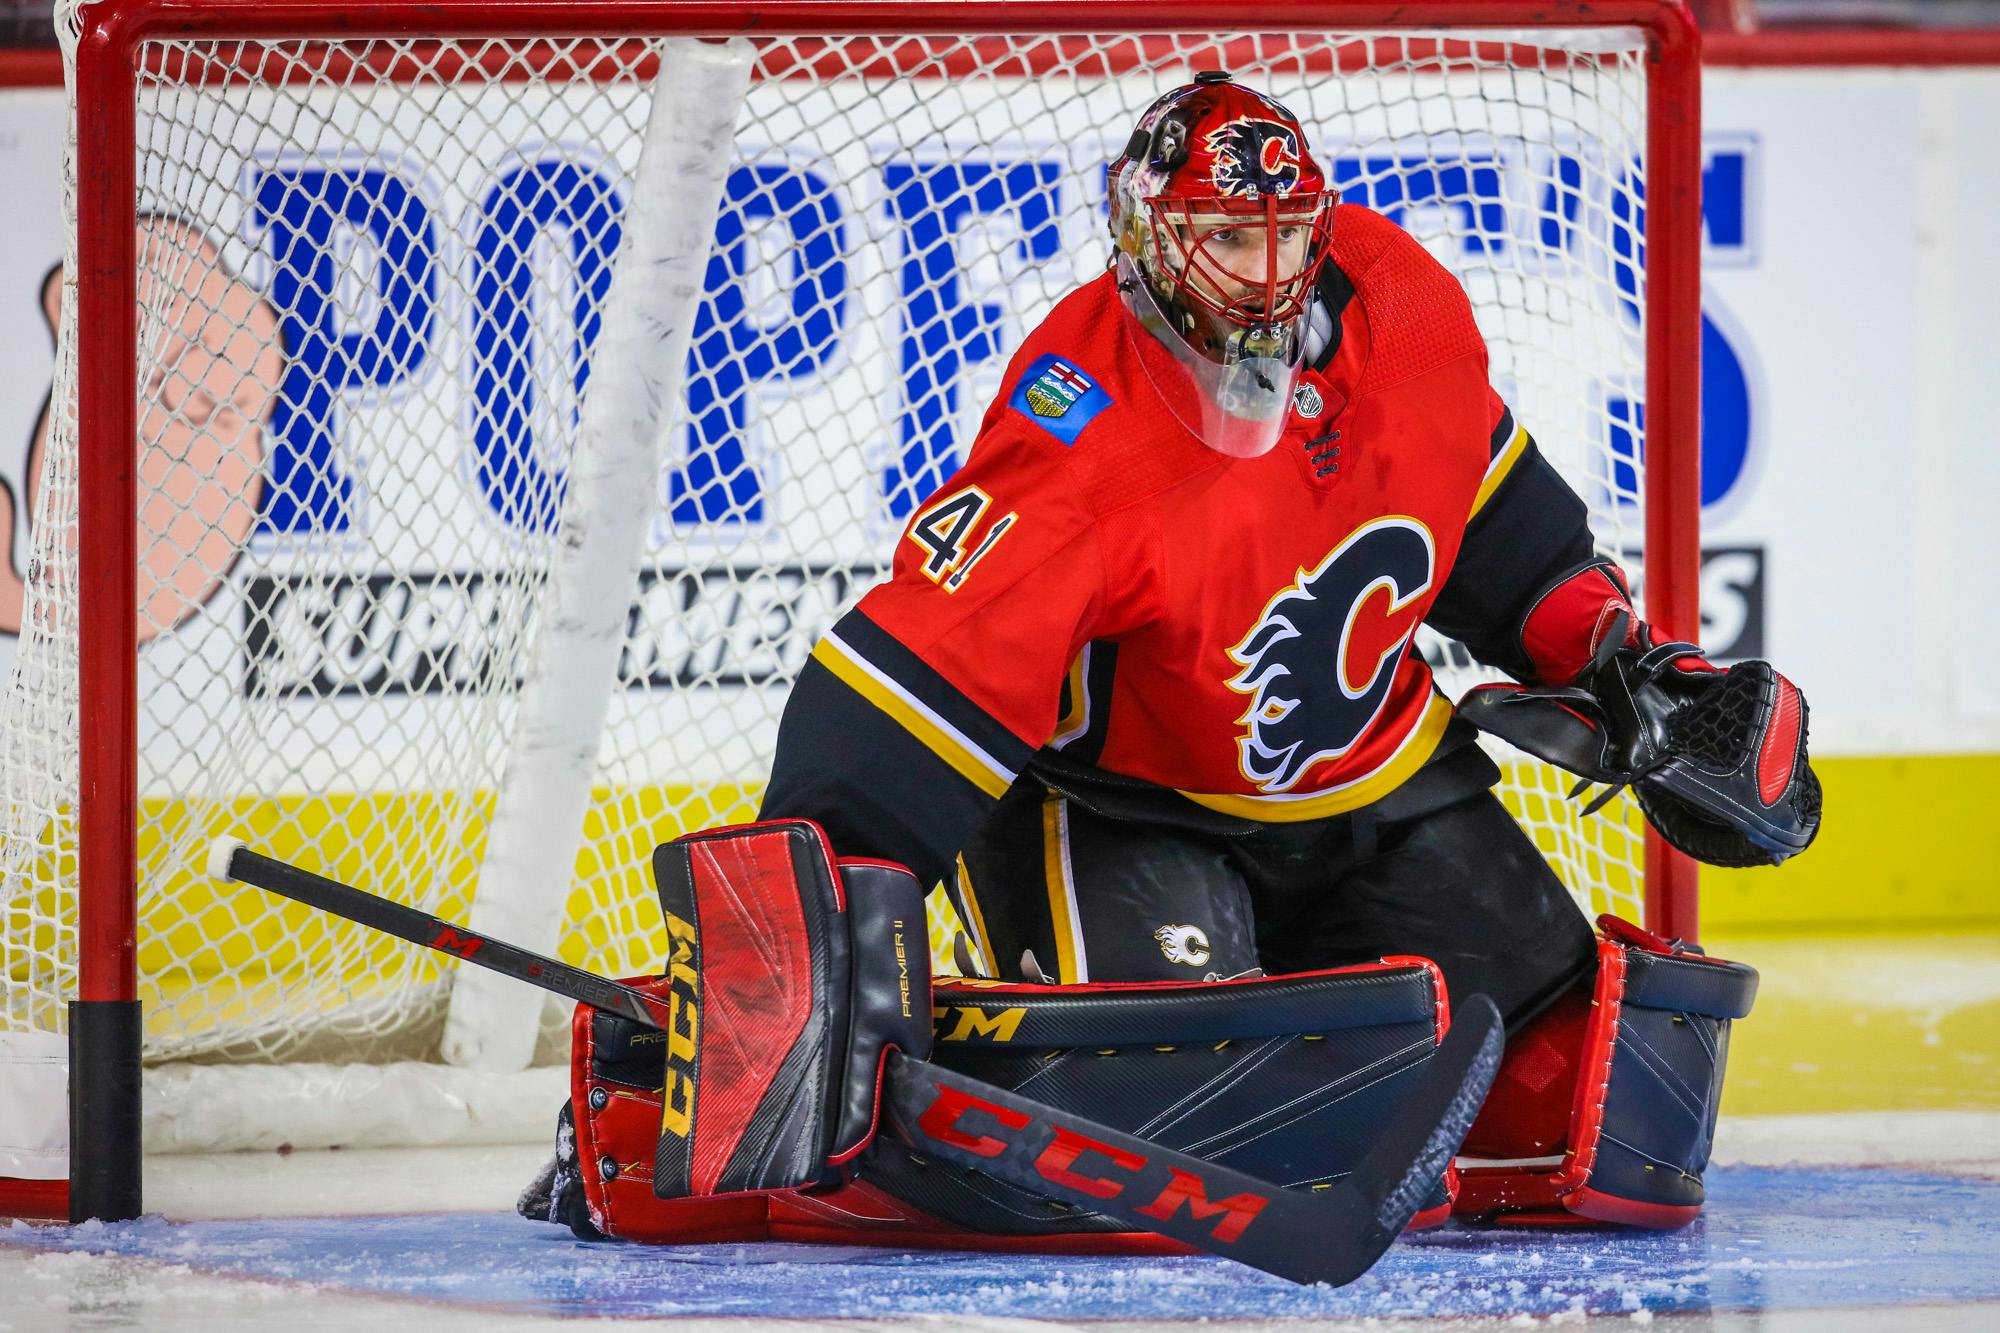 Goalie Mike Smith impressing Calgary Flames early on